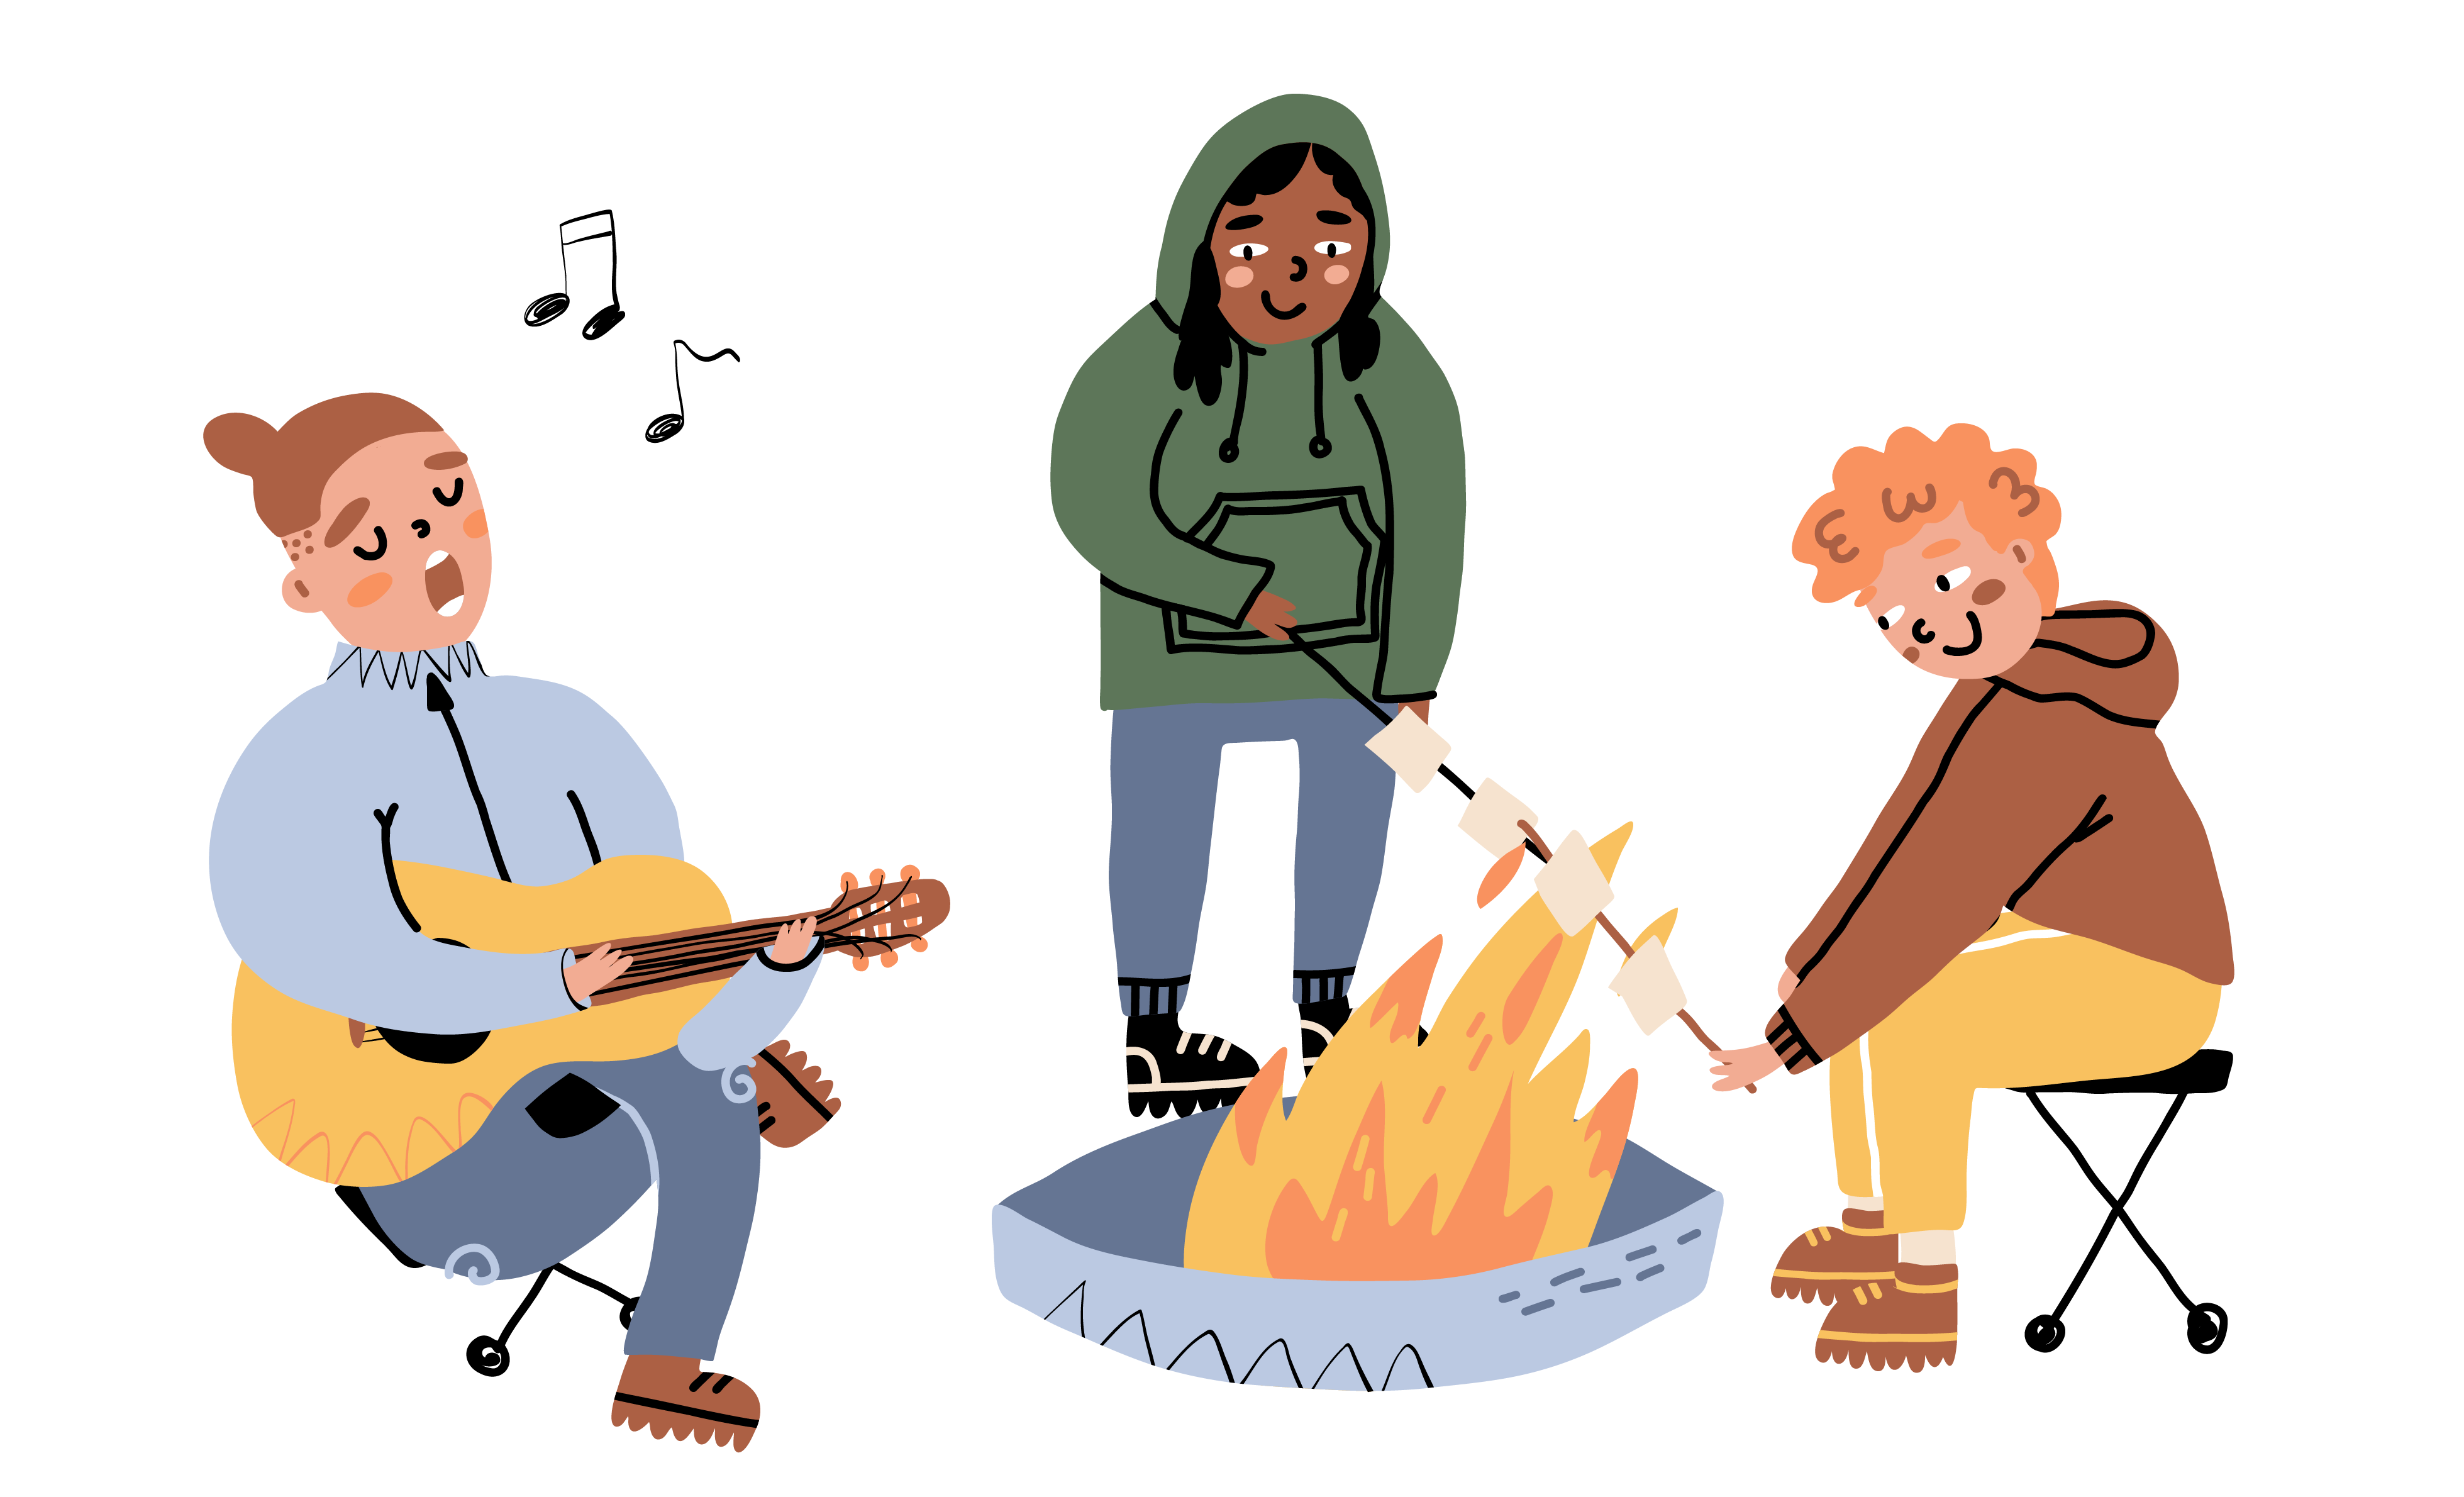 cartoon of three people around a fire making s'mores and singing